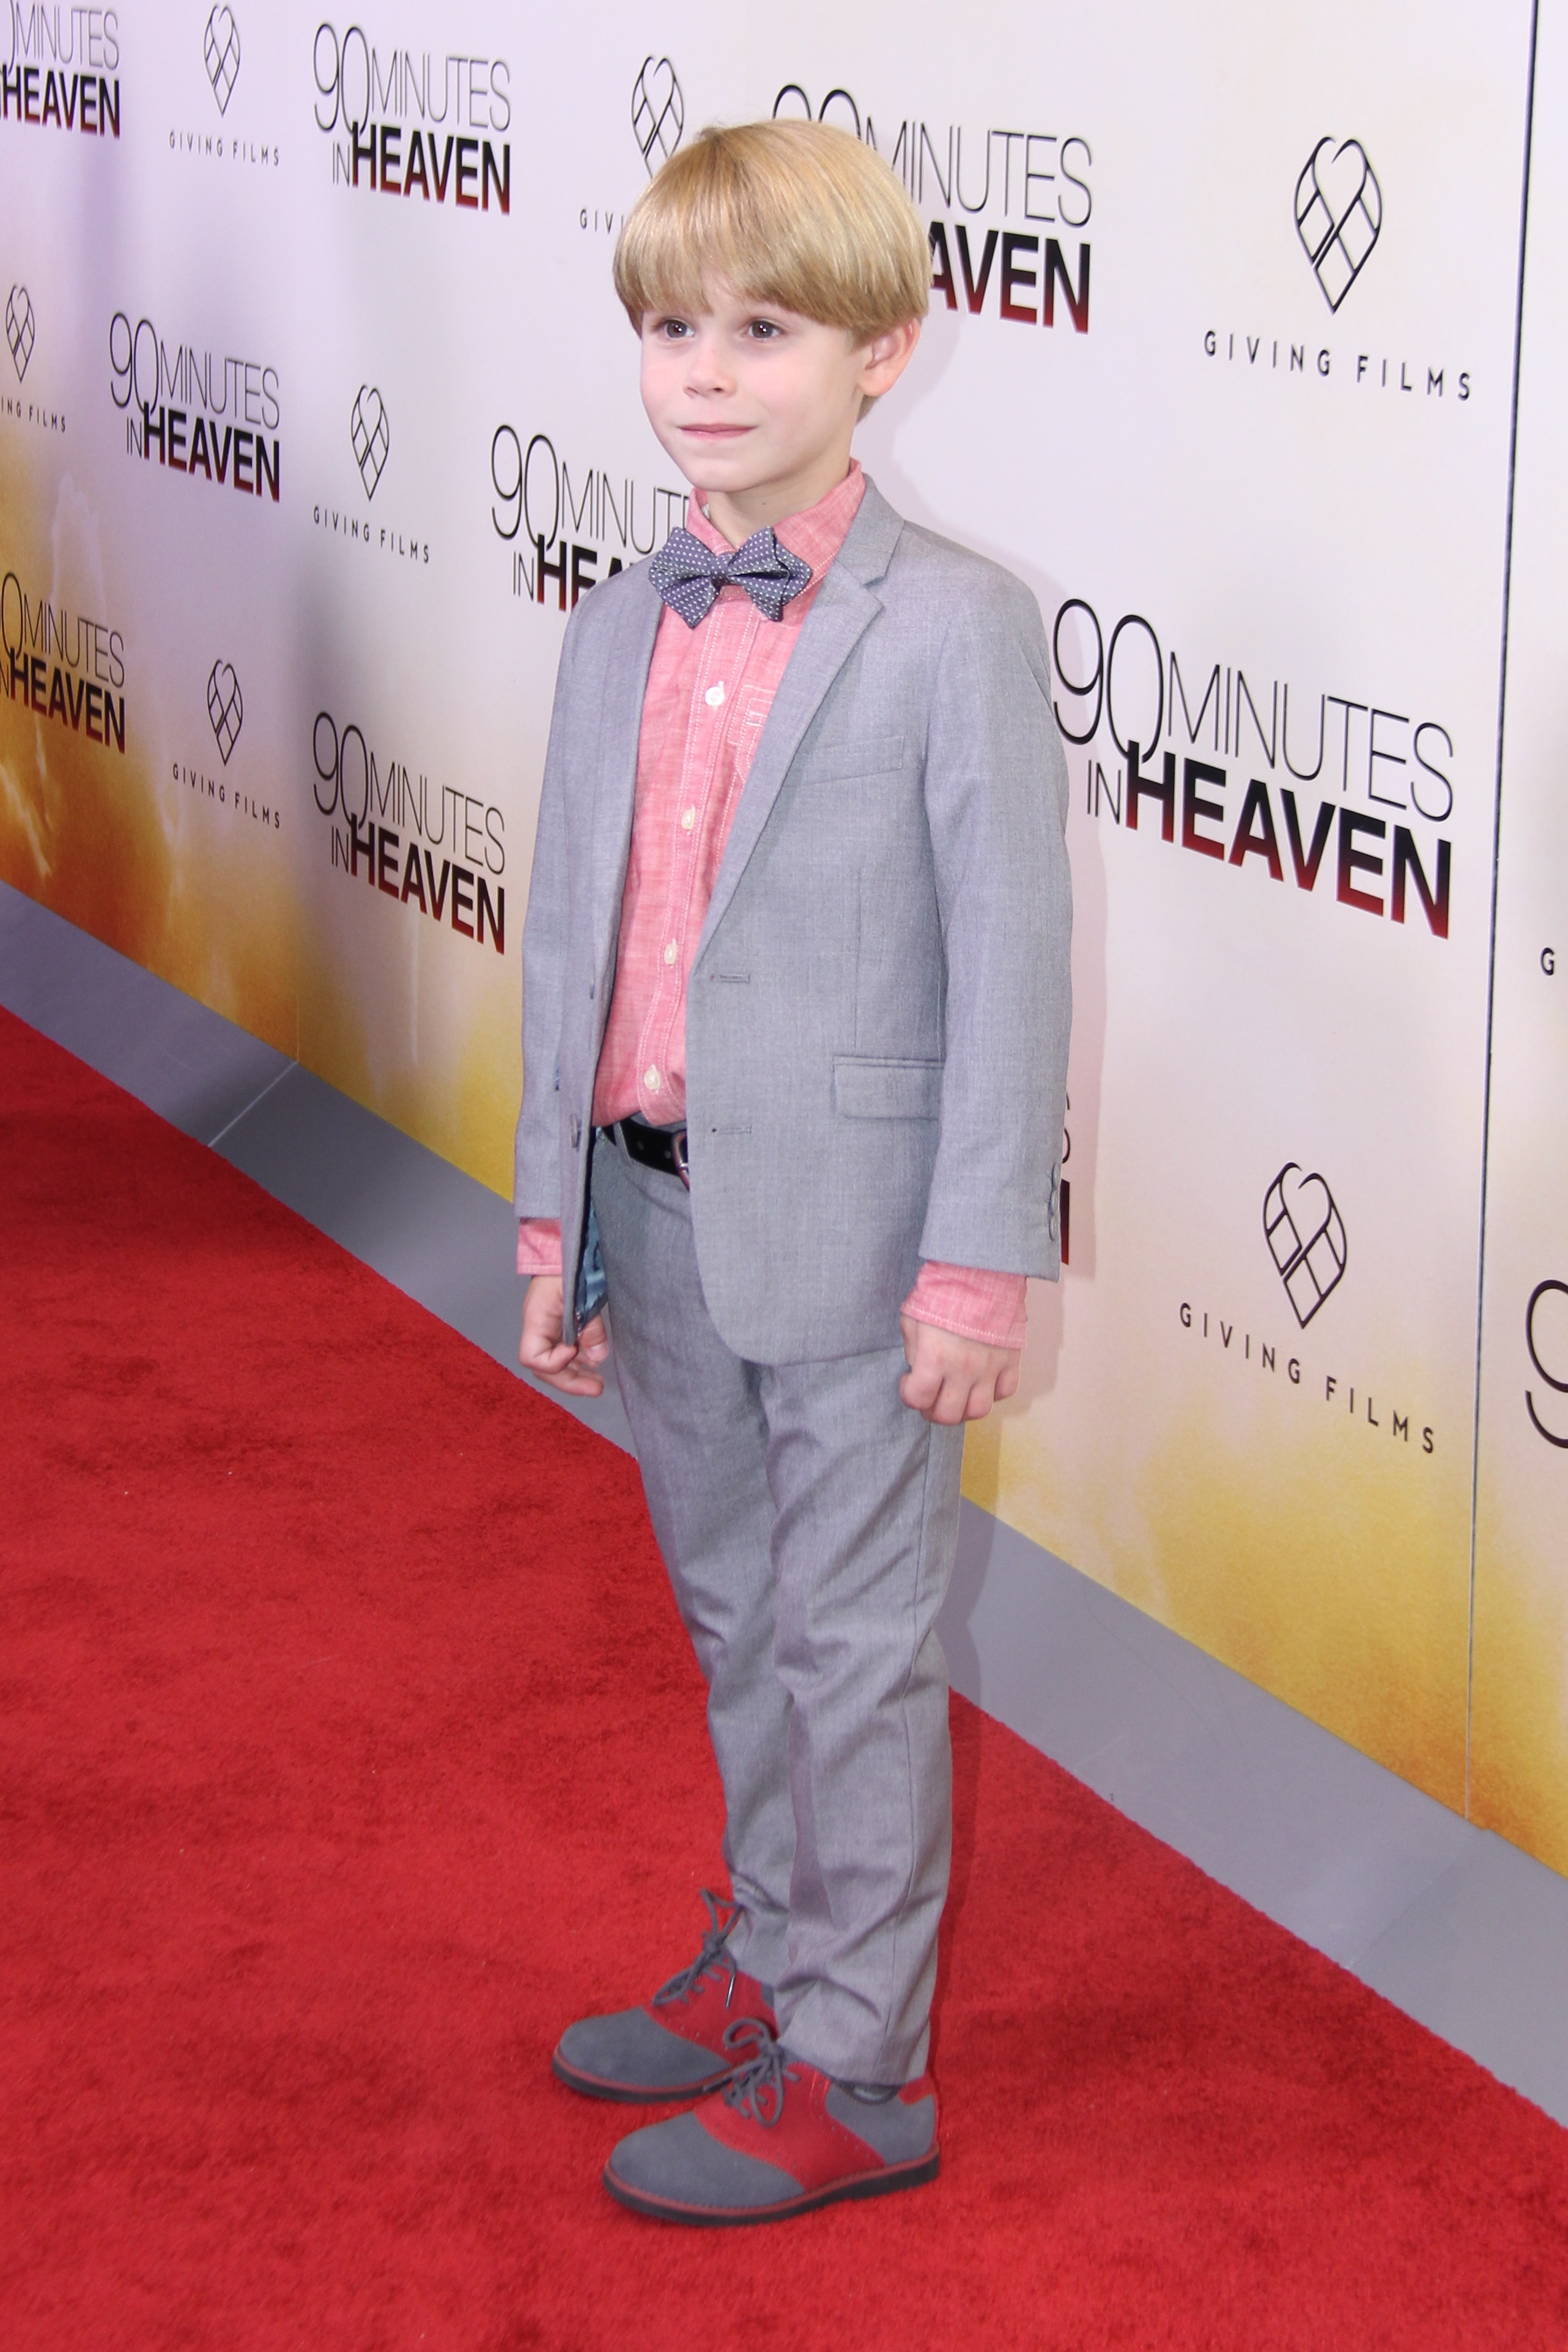 Hudson Meek at the 90 Minutes in Heaven Premiere